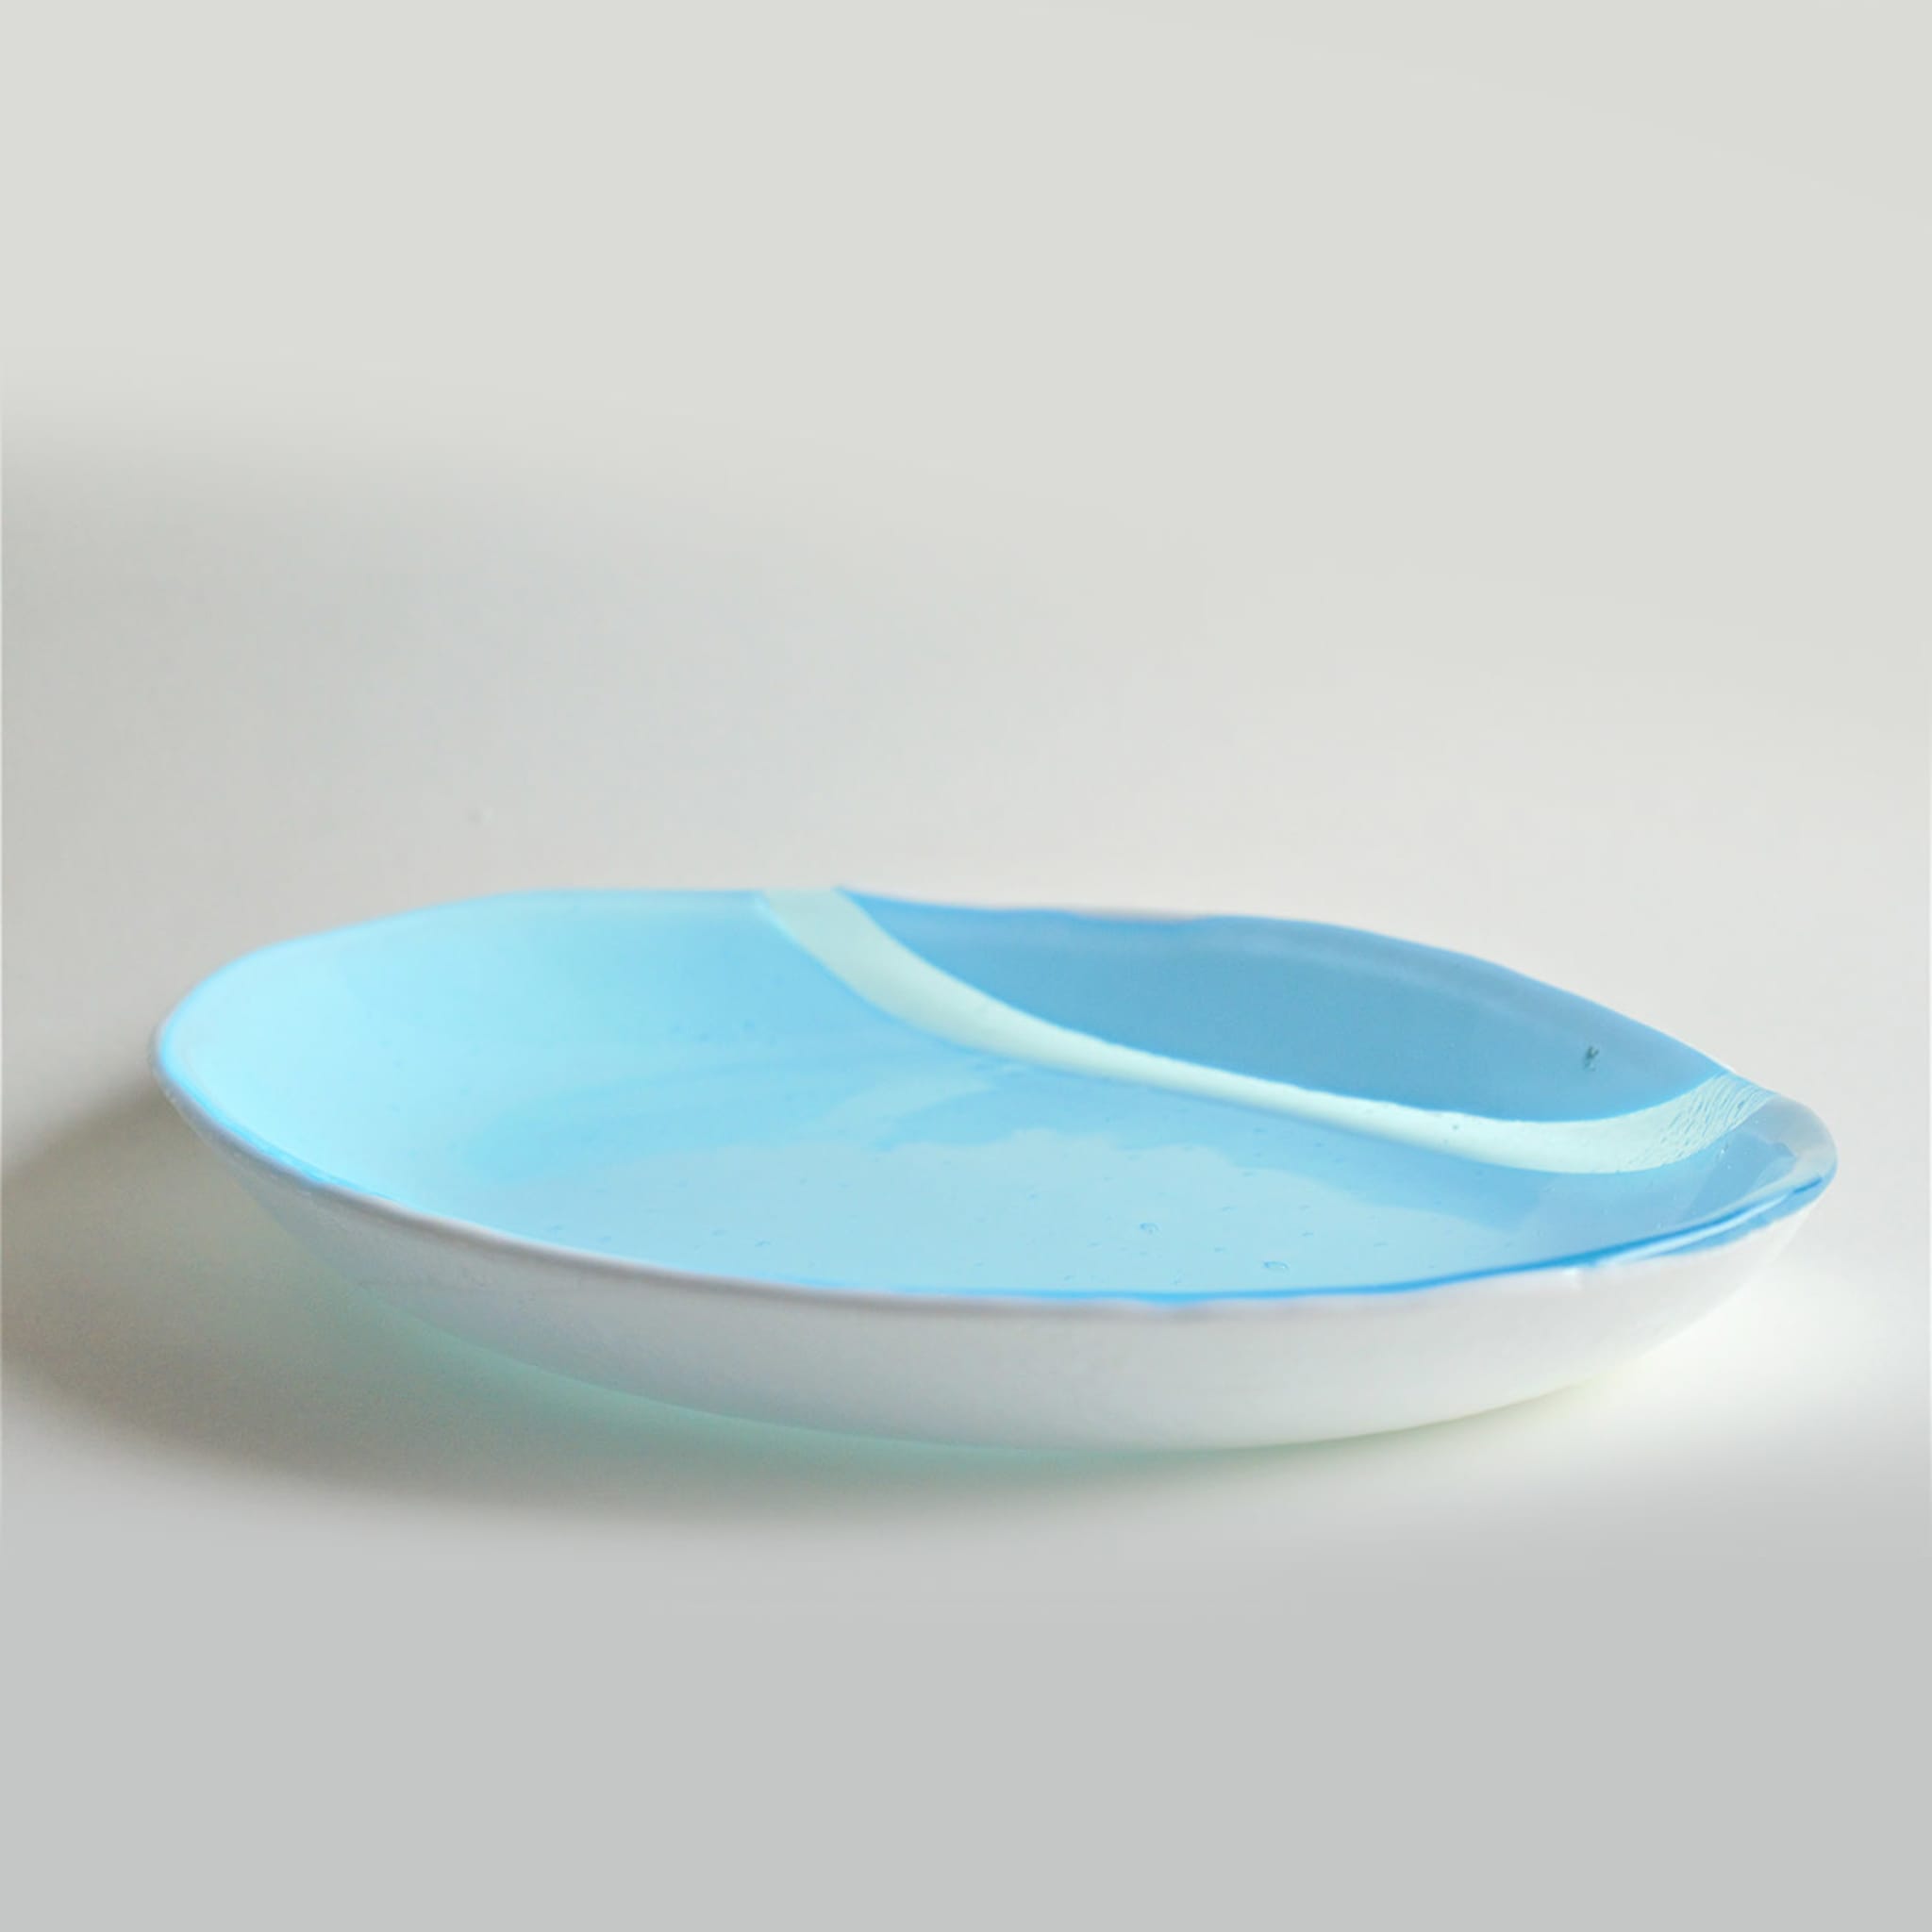 Turquoise Glass Serving Platter - Alternative view 3